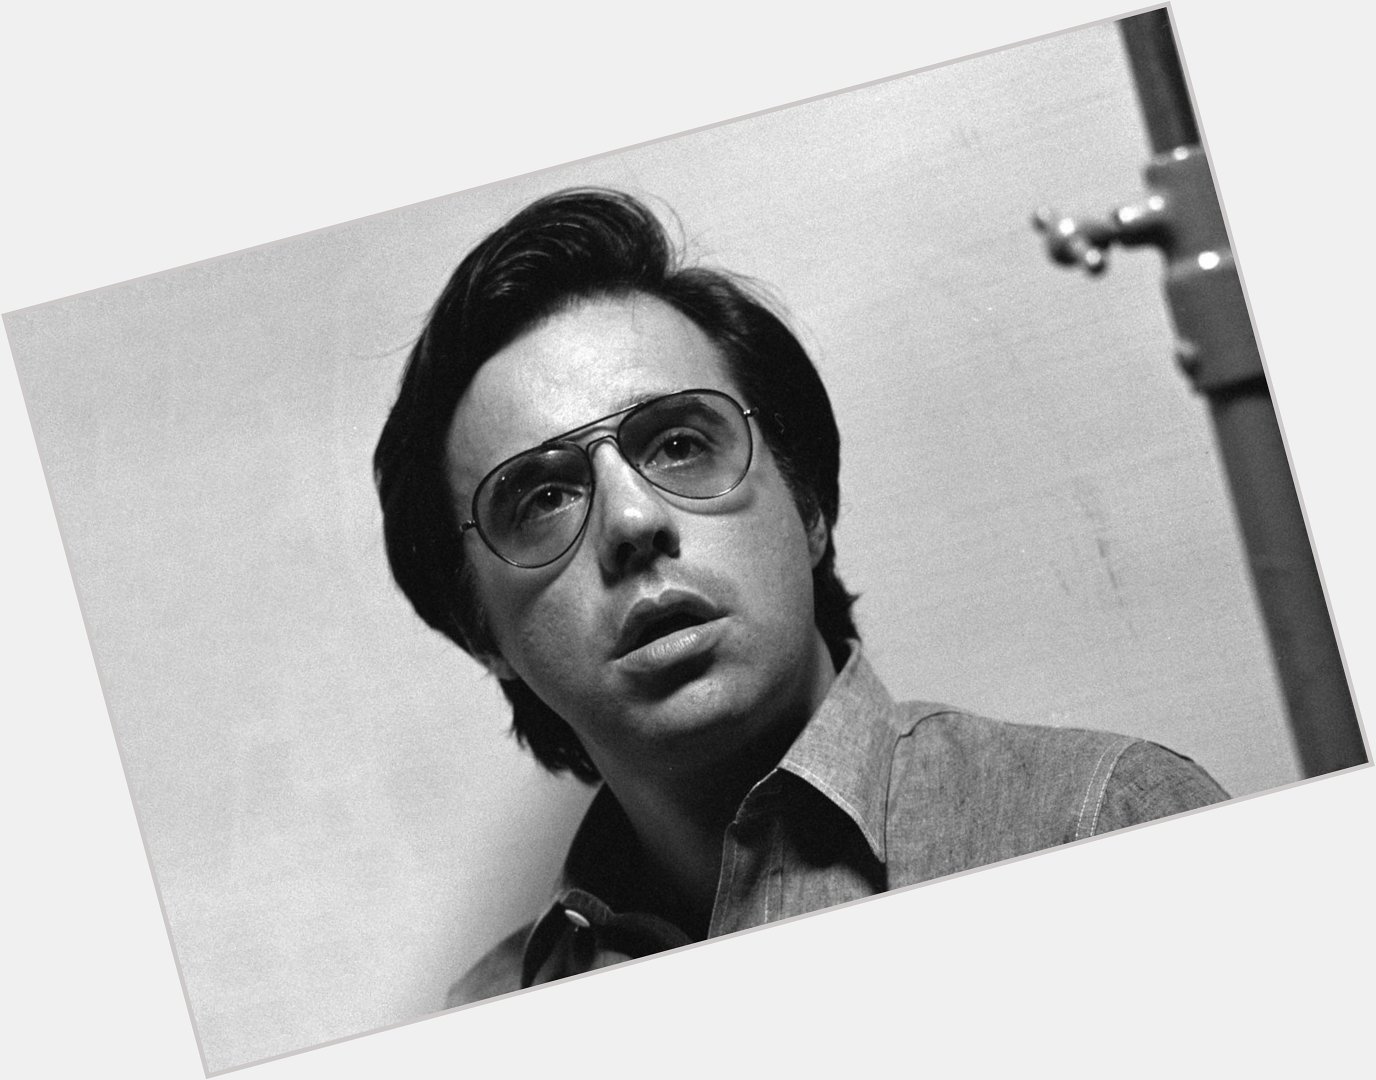 Happy Birthday to THE LAST PICTURE SHOW director Peter Bogdanovich! 